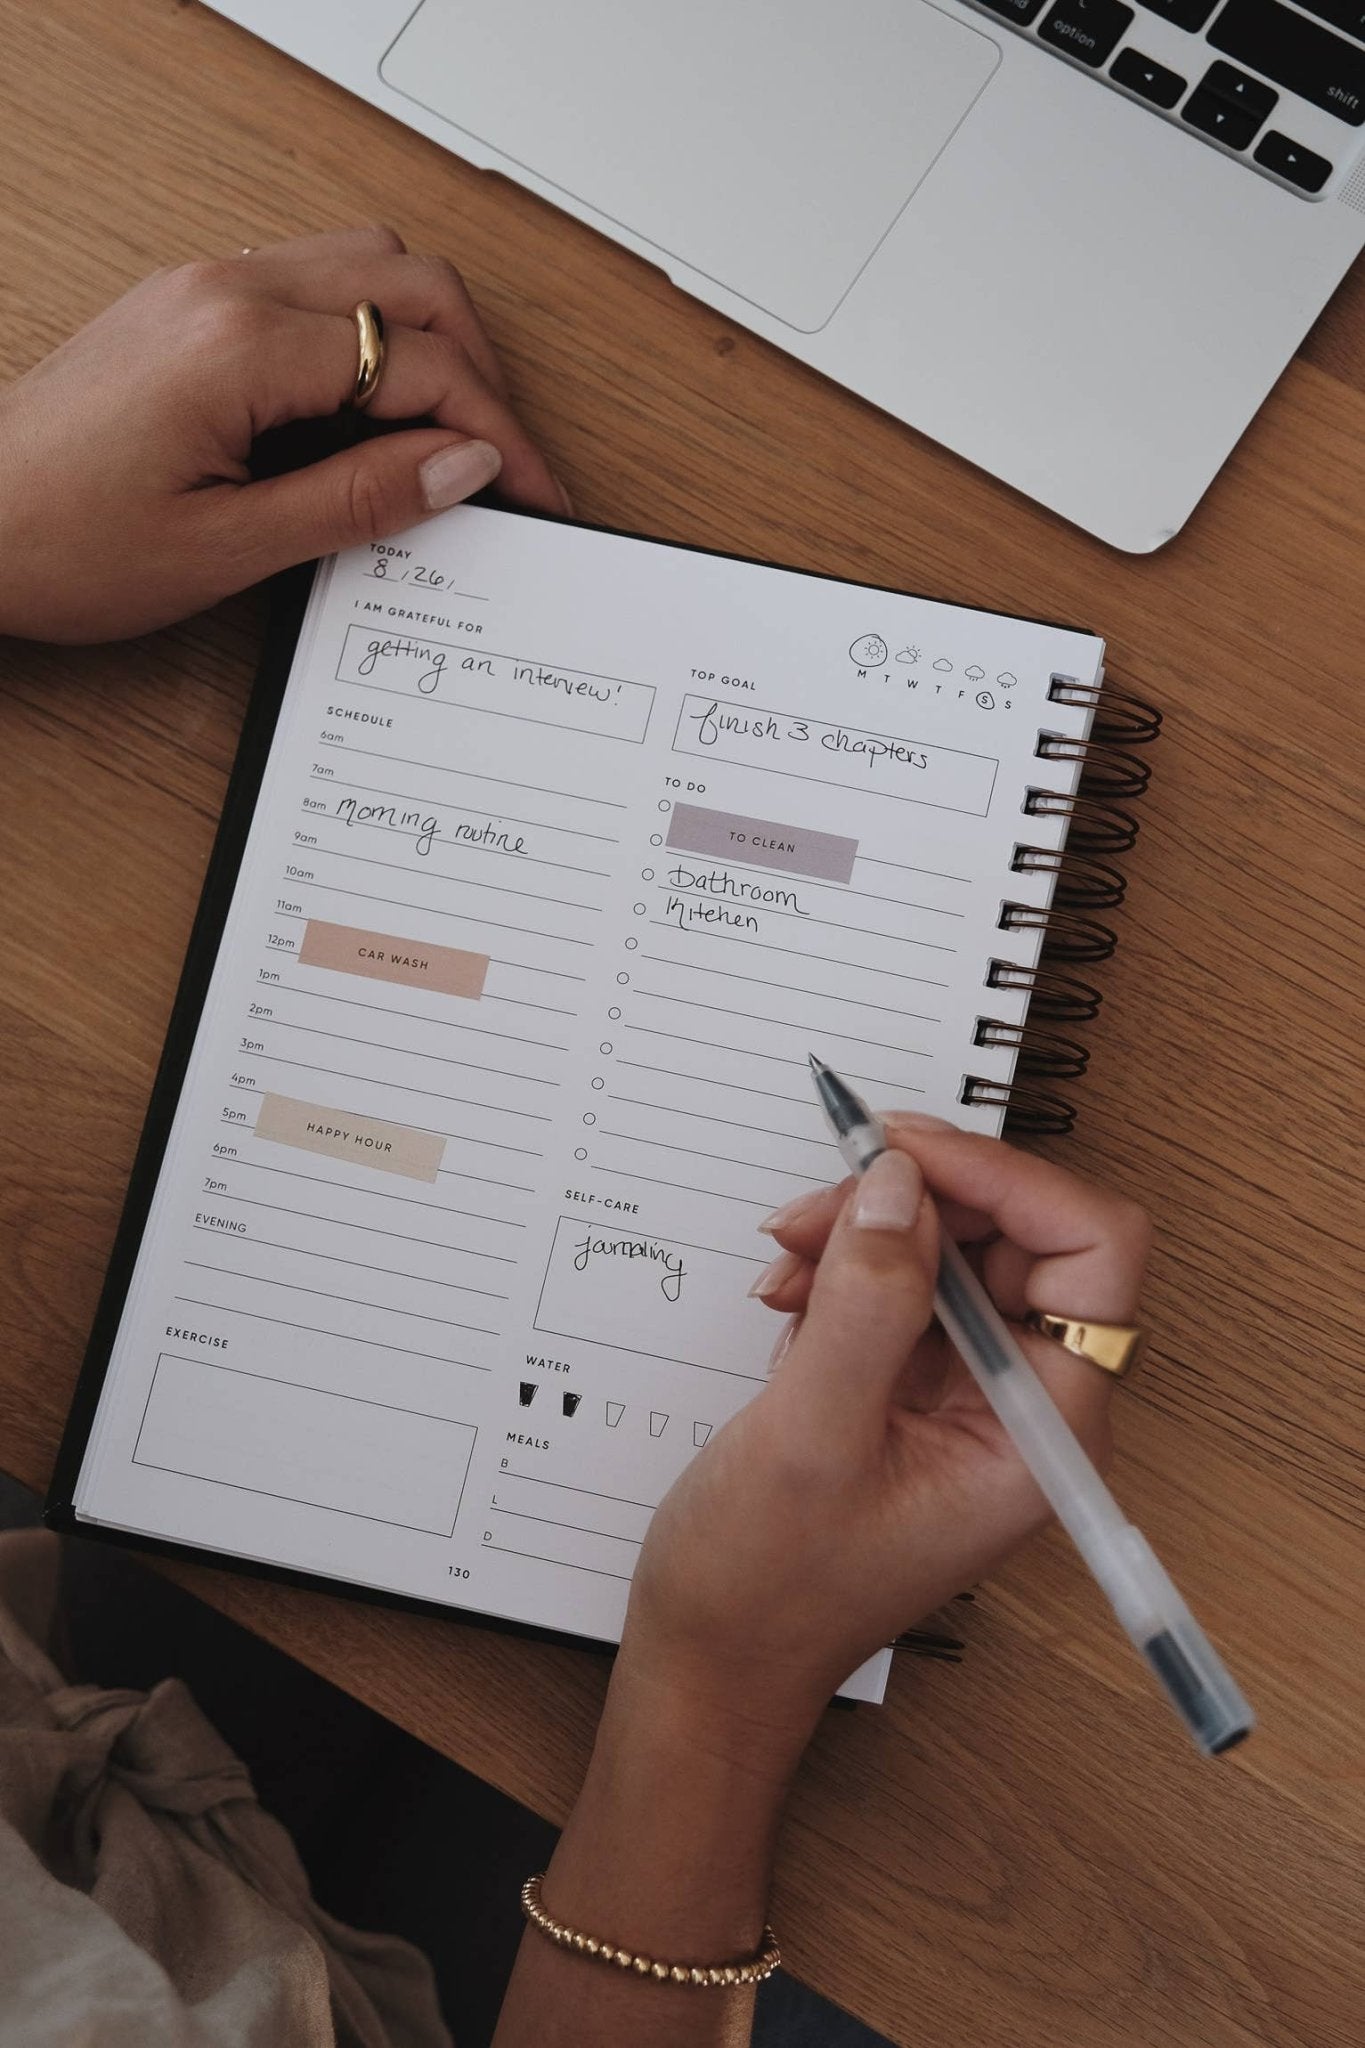 Person organizing a planner using Life Stickers for various activities